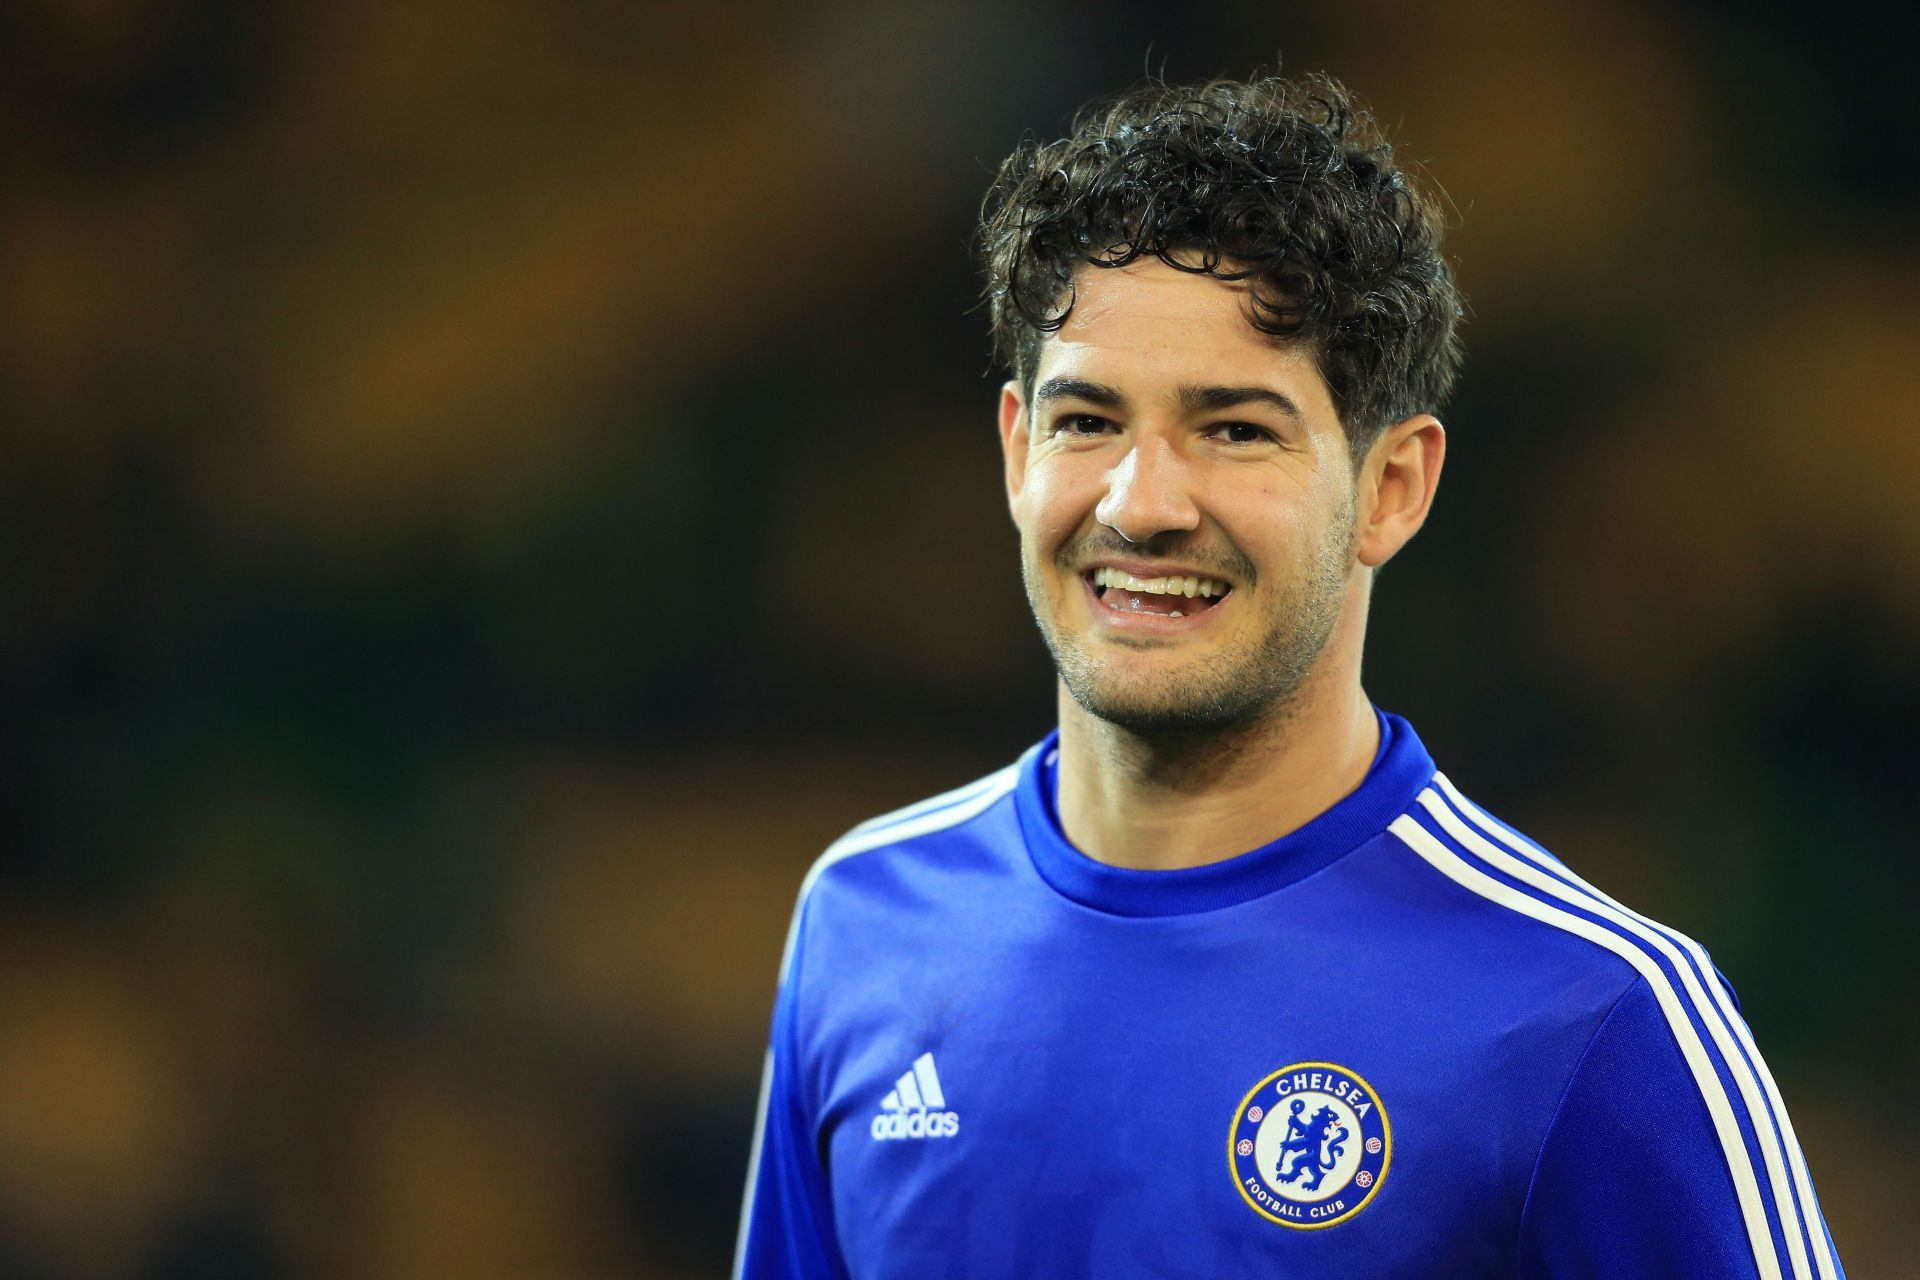 Pato scored one goal during his loan spell with the Blues